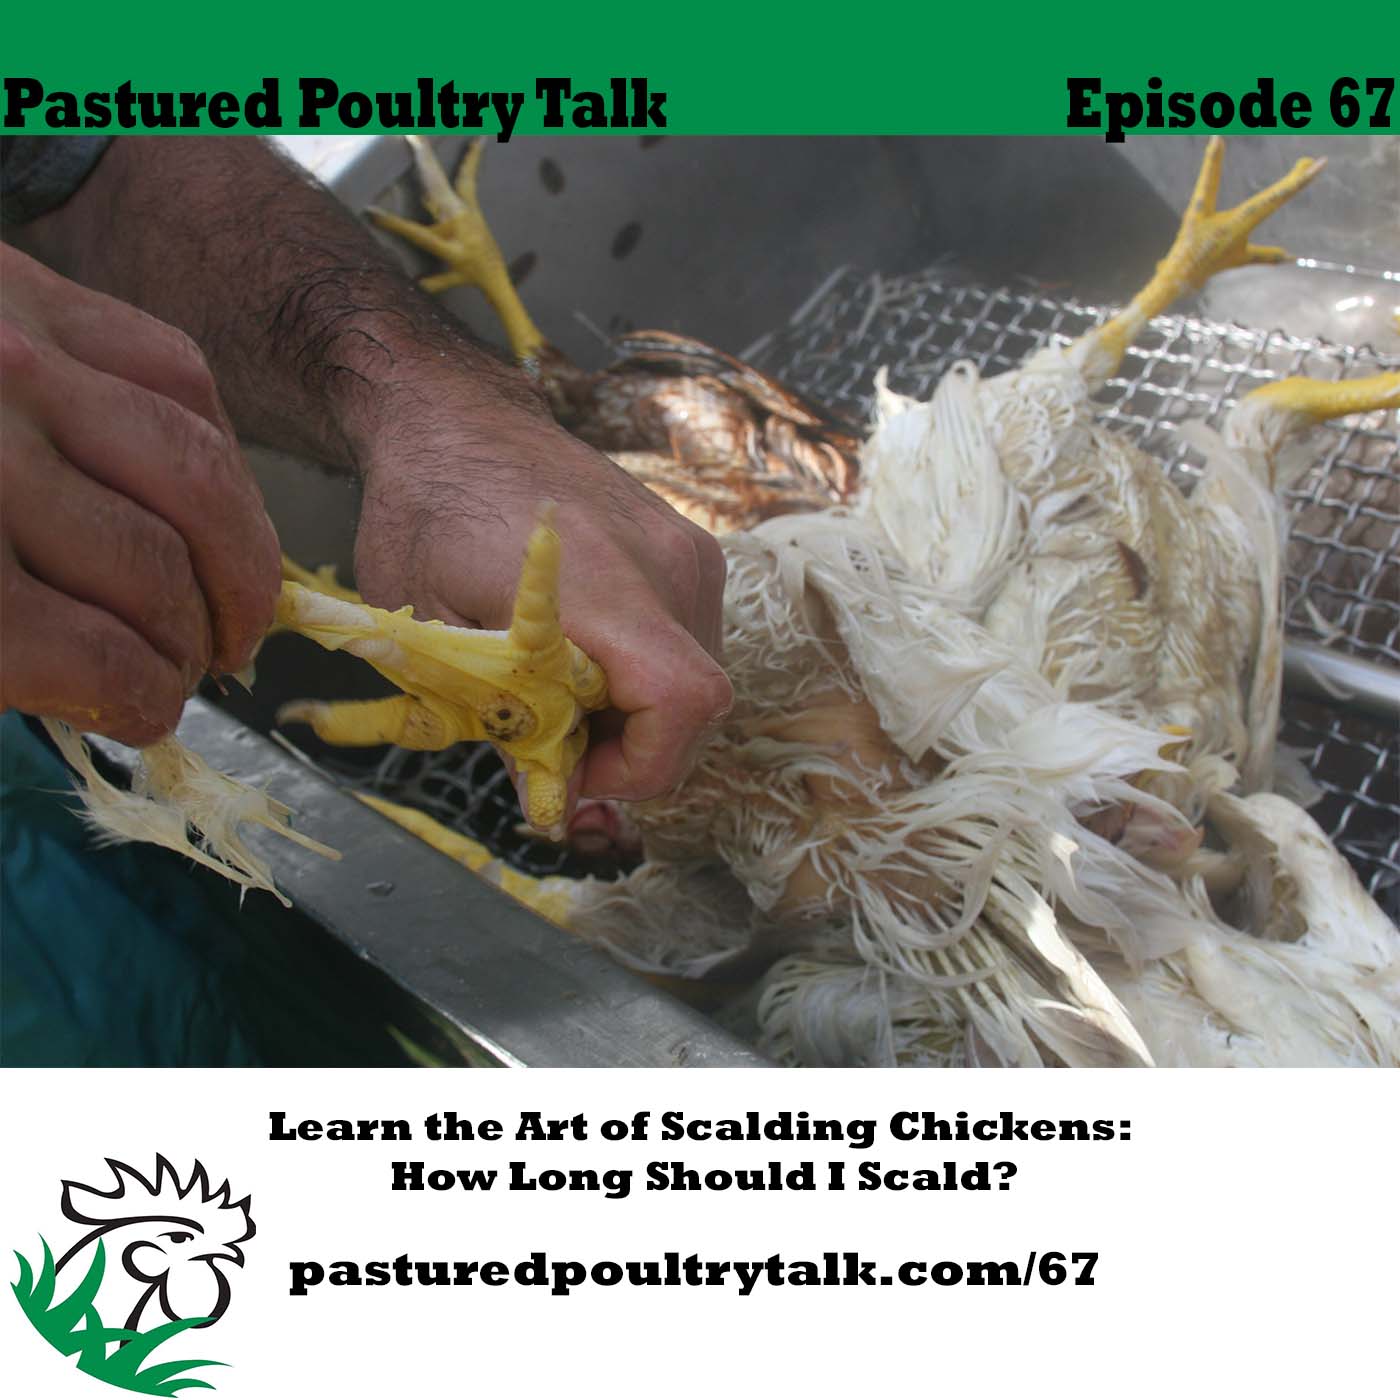 Pastured Poultry Talk episode 67. How to scald chickens.